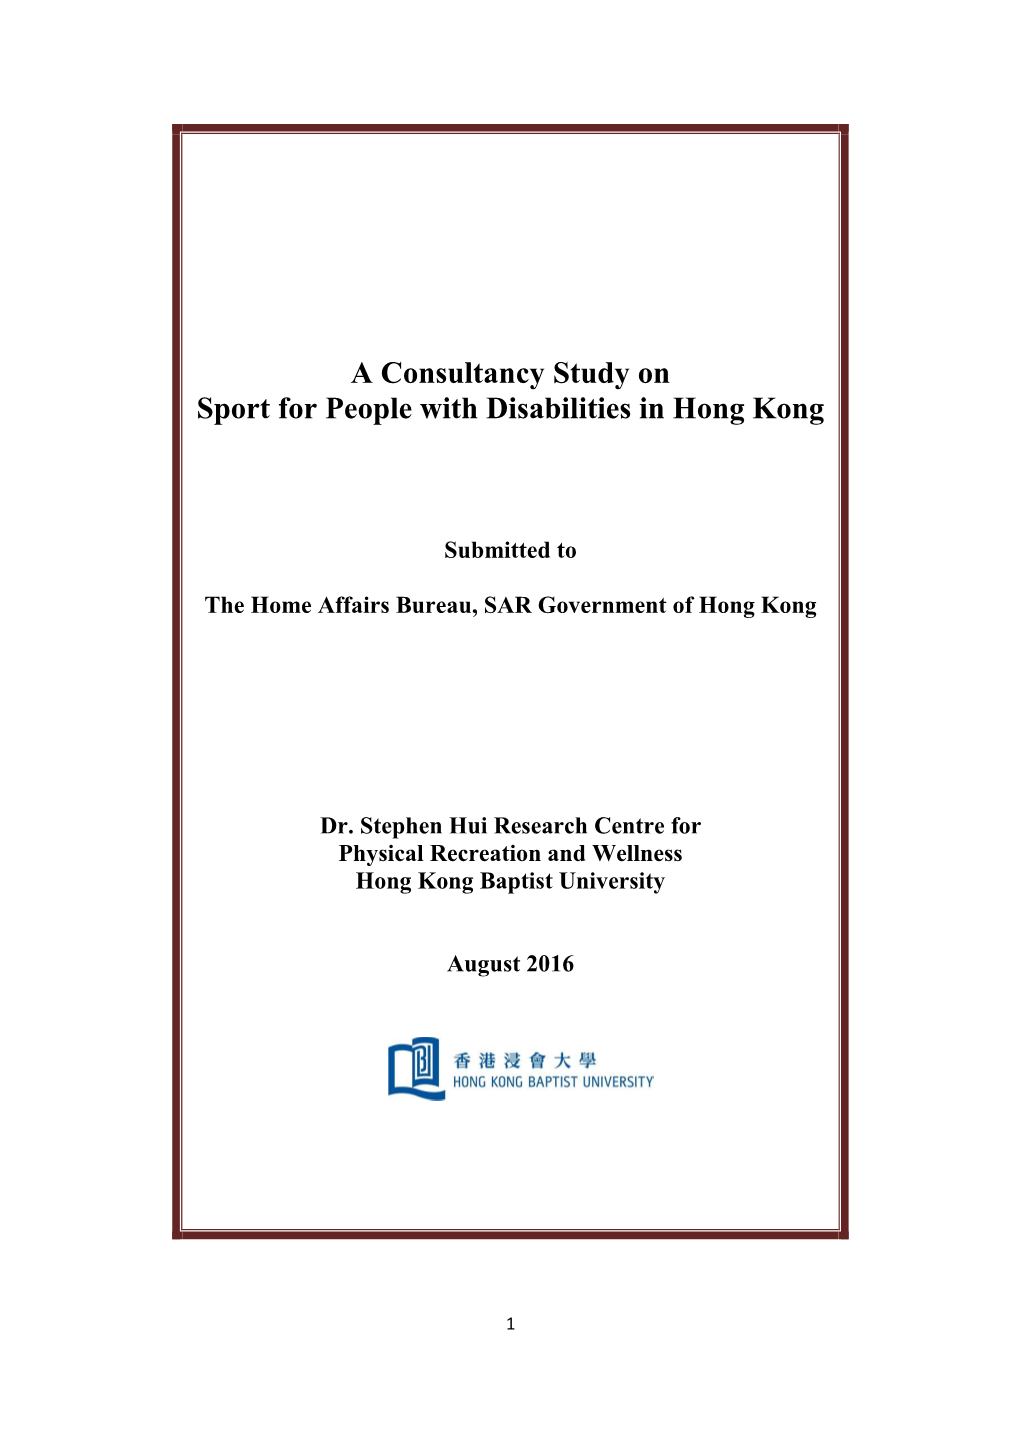 A Consultancy Study on Sport for People with Disabilities in Hong Kong